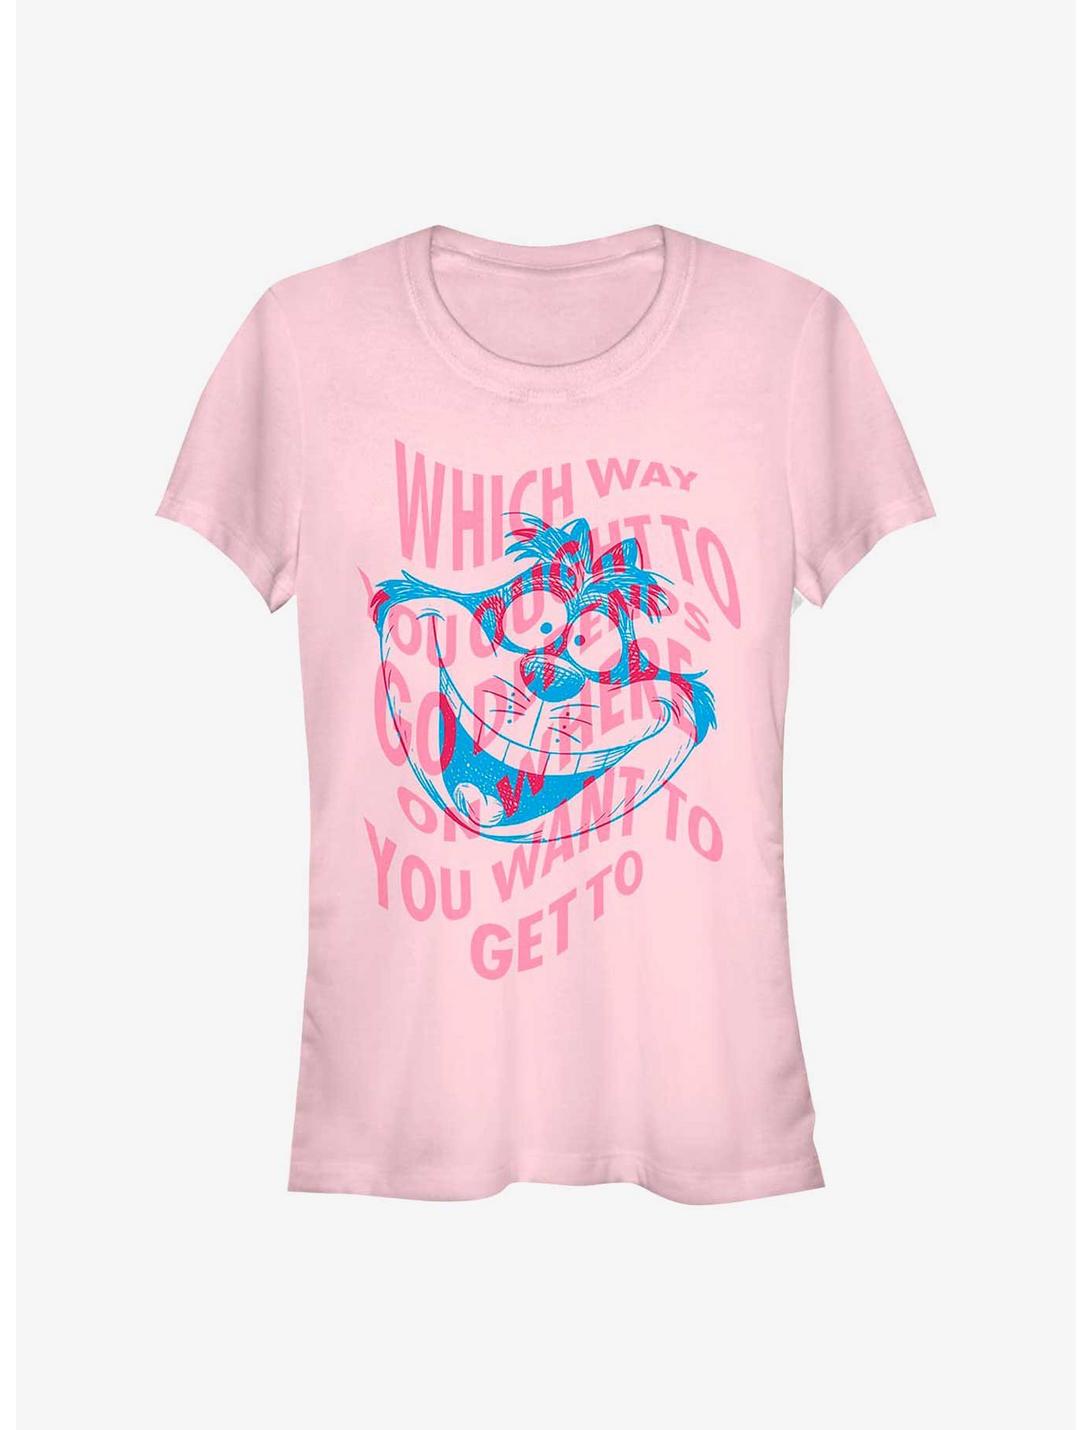 Disney Alice In Wonderland Which Way You Ought To Go Girls T-Shirt, LIGHT PINK, hi-res